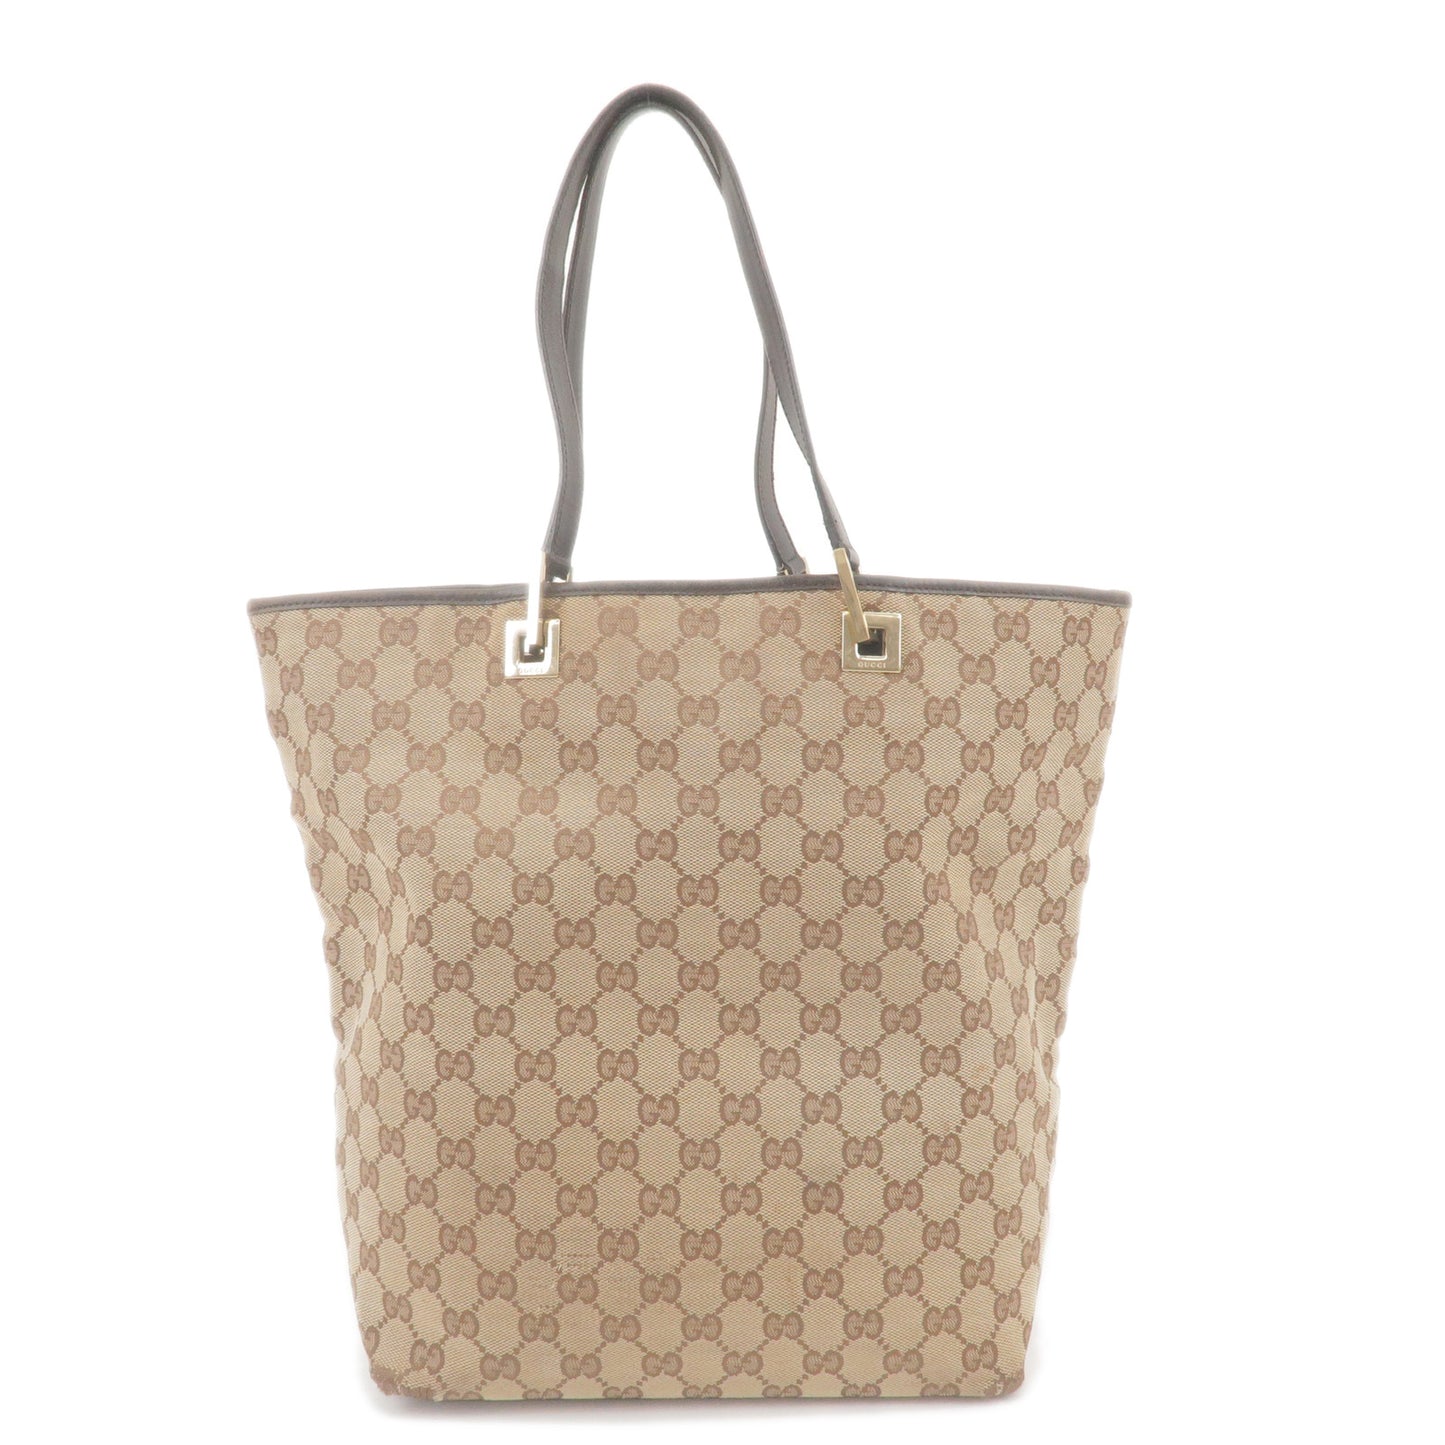 GUCCI-GG-Canvas-Leather-Tote-Bag-Beige-Brown-002・1098